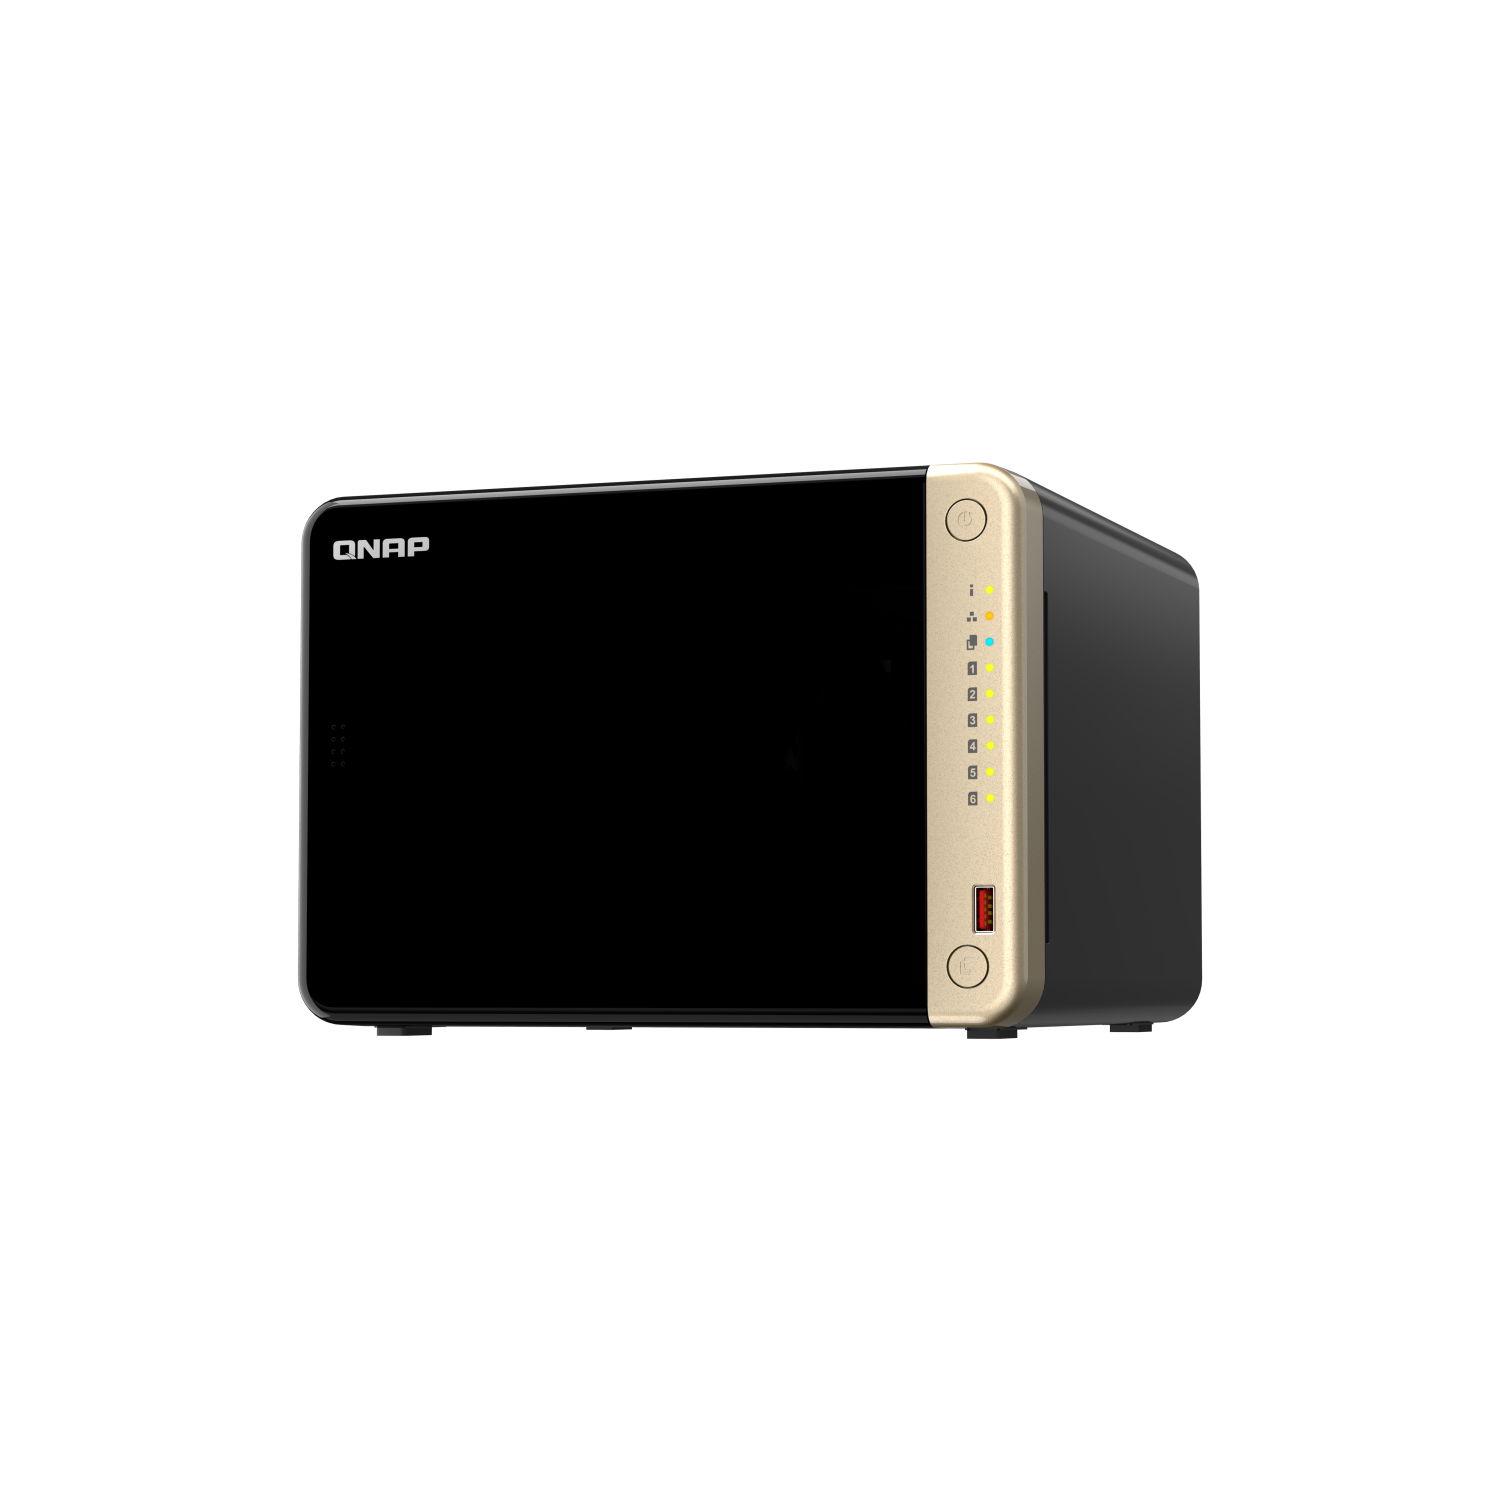 QNAP TS-664-8G-US 6 Bay High-Performance Desktop NAS with Intel Celeron Quad-core Processor, M.2 PCIe Slots and Dual 2.5GbE (2.5G/1G/100M) Network Connectivity (Diskless)